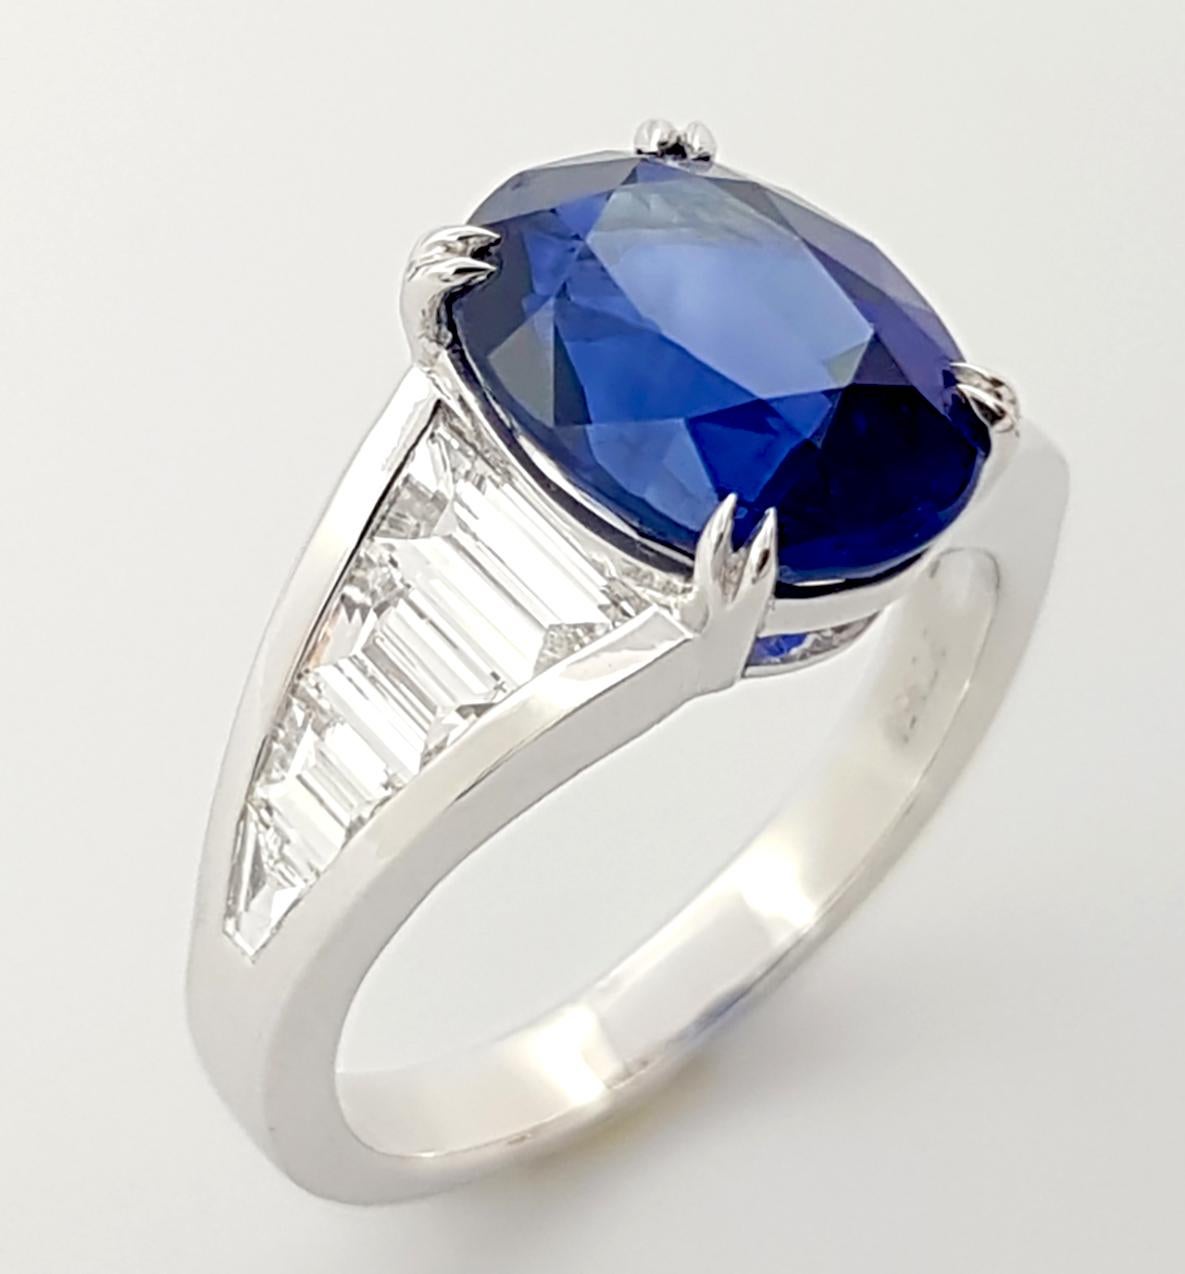 Royal Blue Sapphire with Diamond Ring set in Platinum 950 Settings For Sale 5